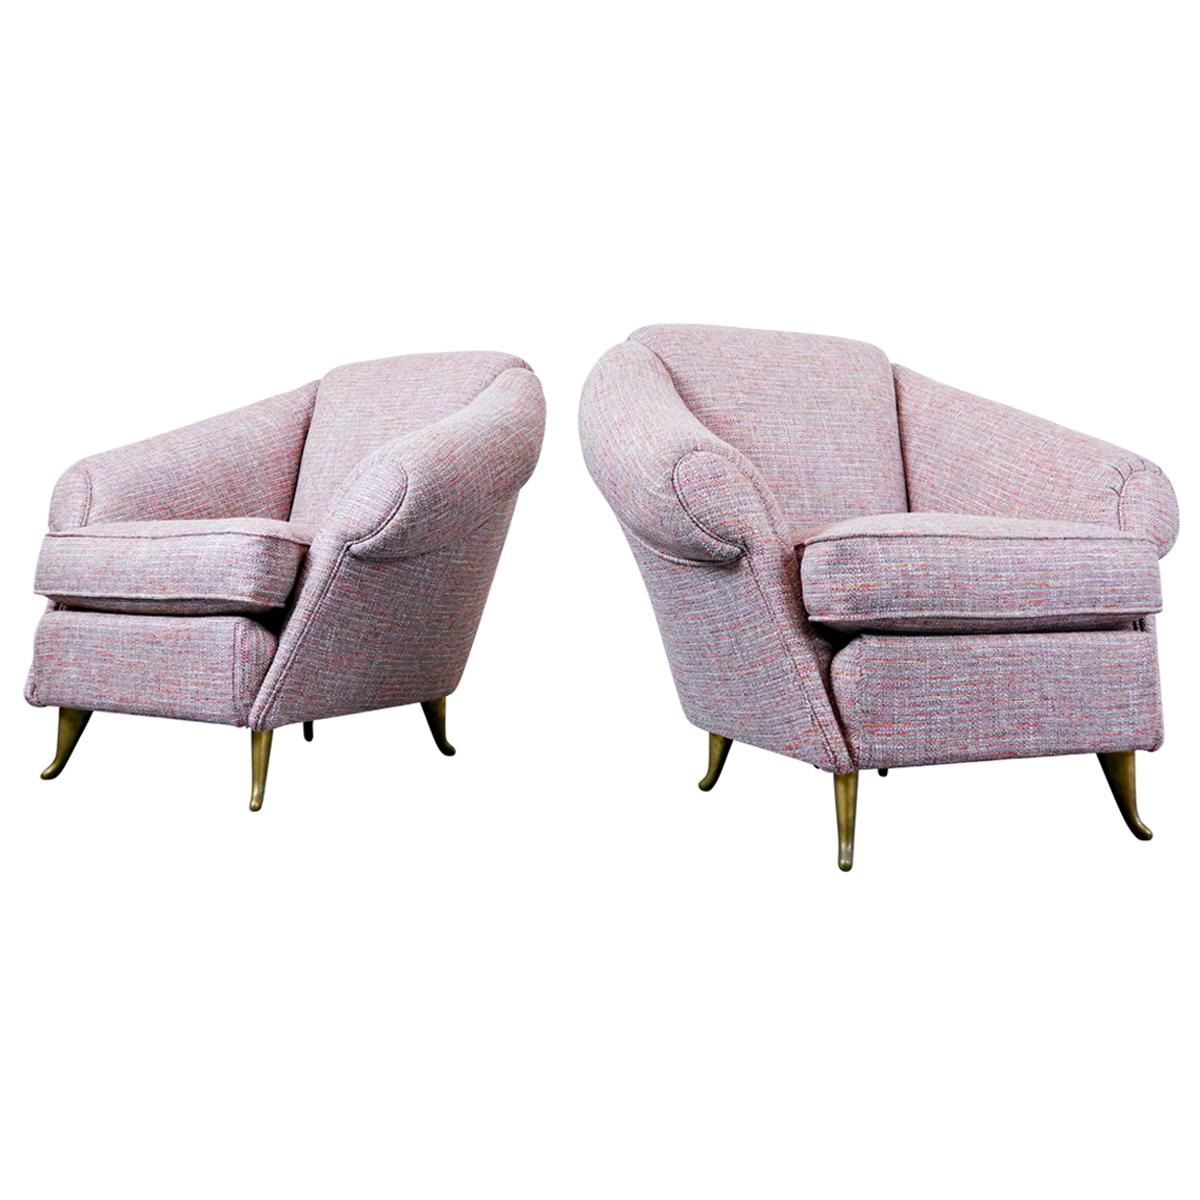 Pair of Mid-Century Modern Light Pink Italian Armchairs, 1950s, New Upholstery For Sale